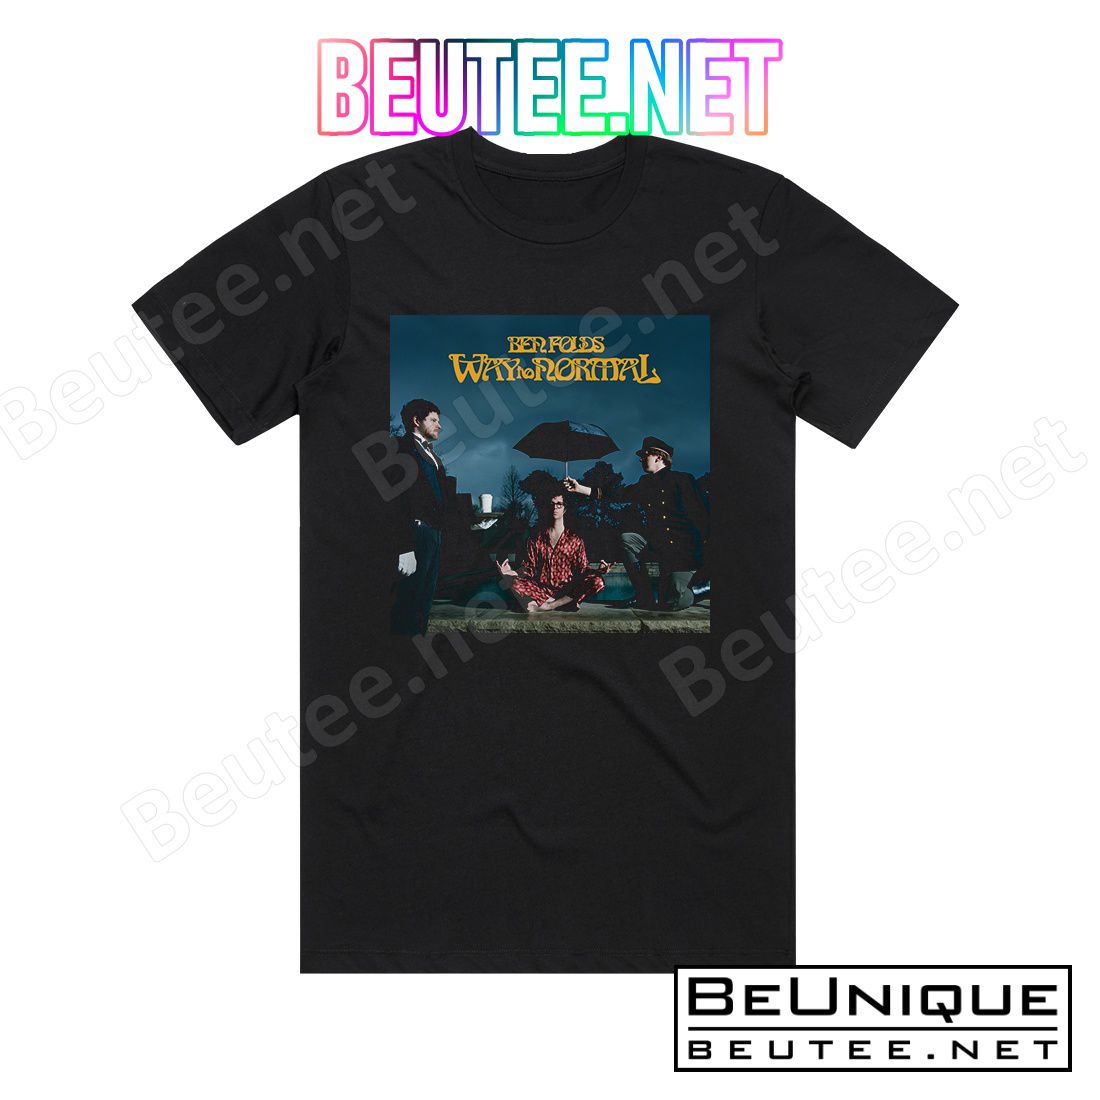 Ben Folds Way To Normal 1 Album Cover T-Shirt